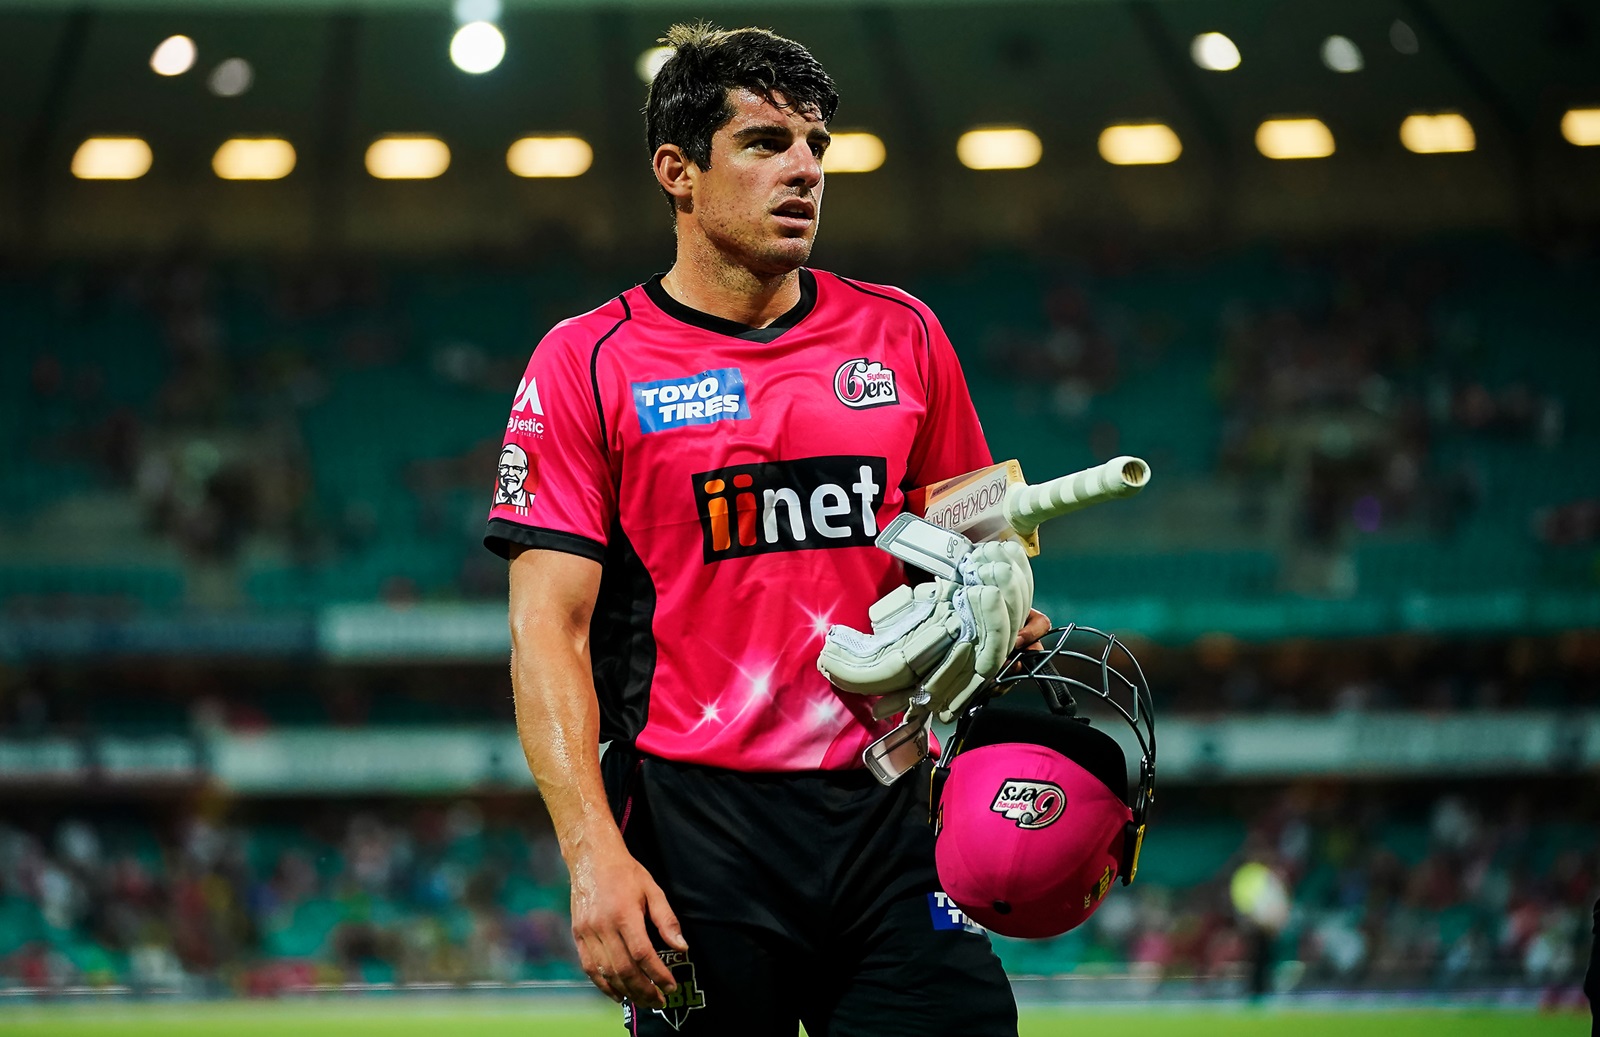 IPL 2021: I Was Not Expecting To Get Picked Up At All - Moises Henriques After Being Bought For INR 4.2 Crore By Punjab Kings